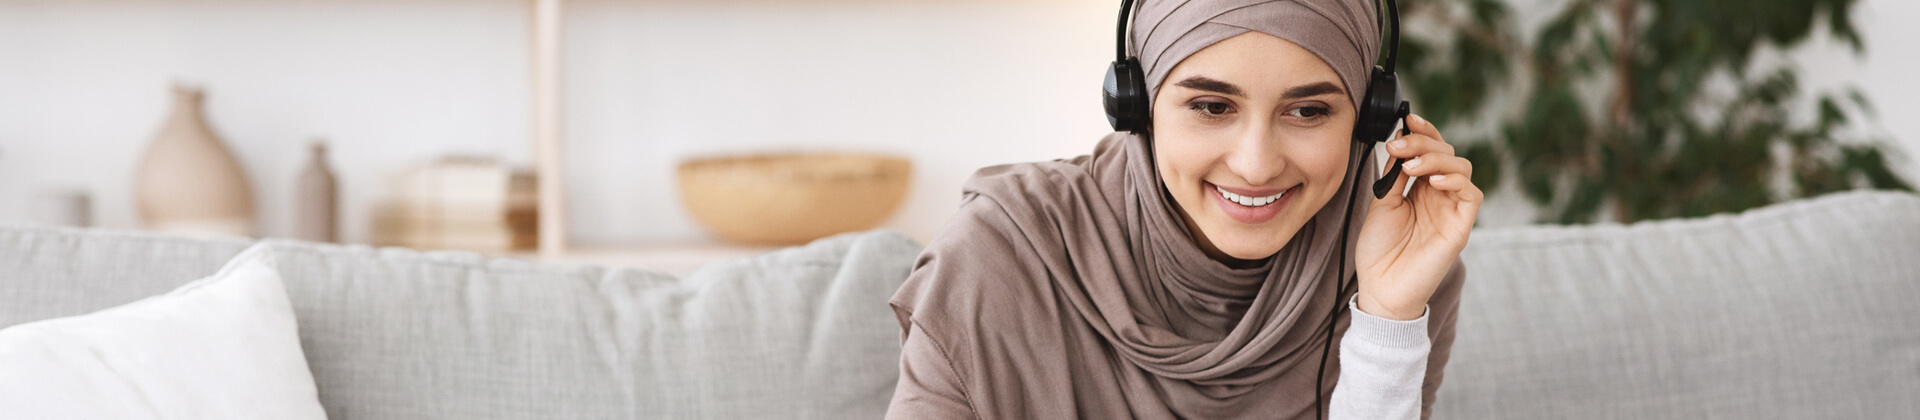 Woman in headscarf takes a call on a headset as she sits on a couch